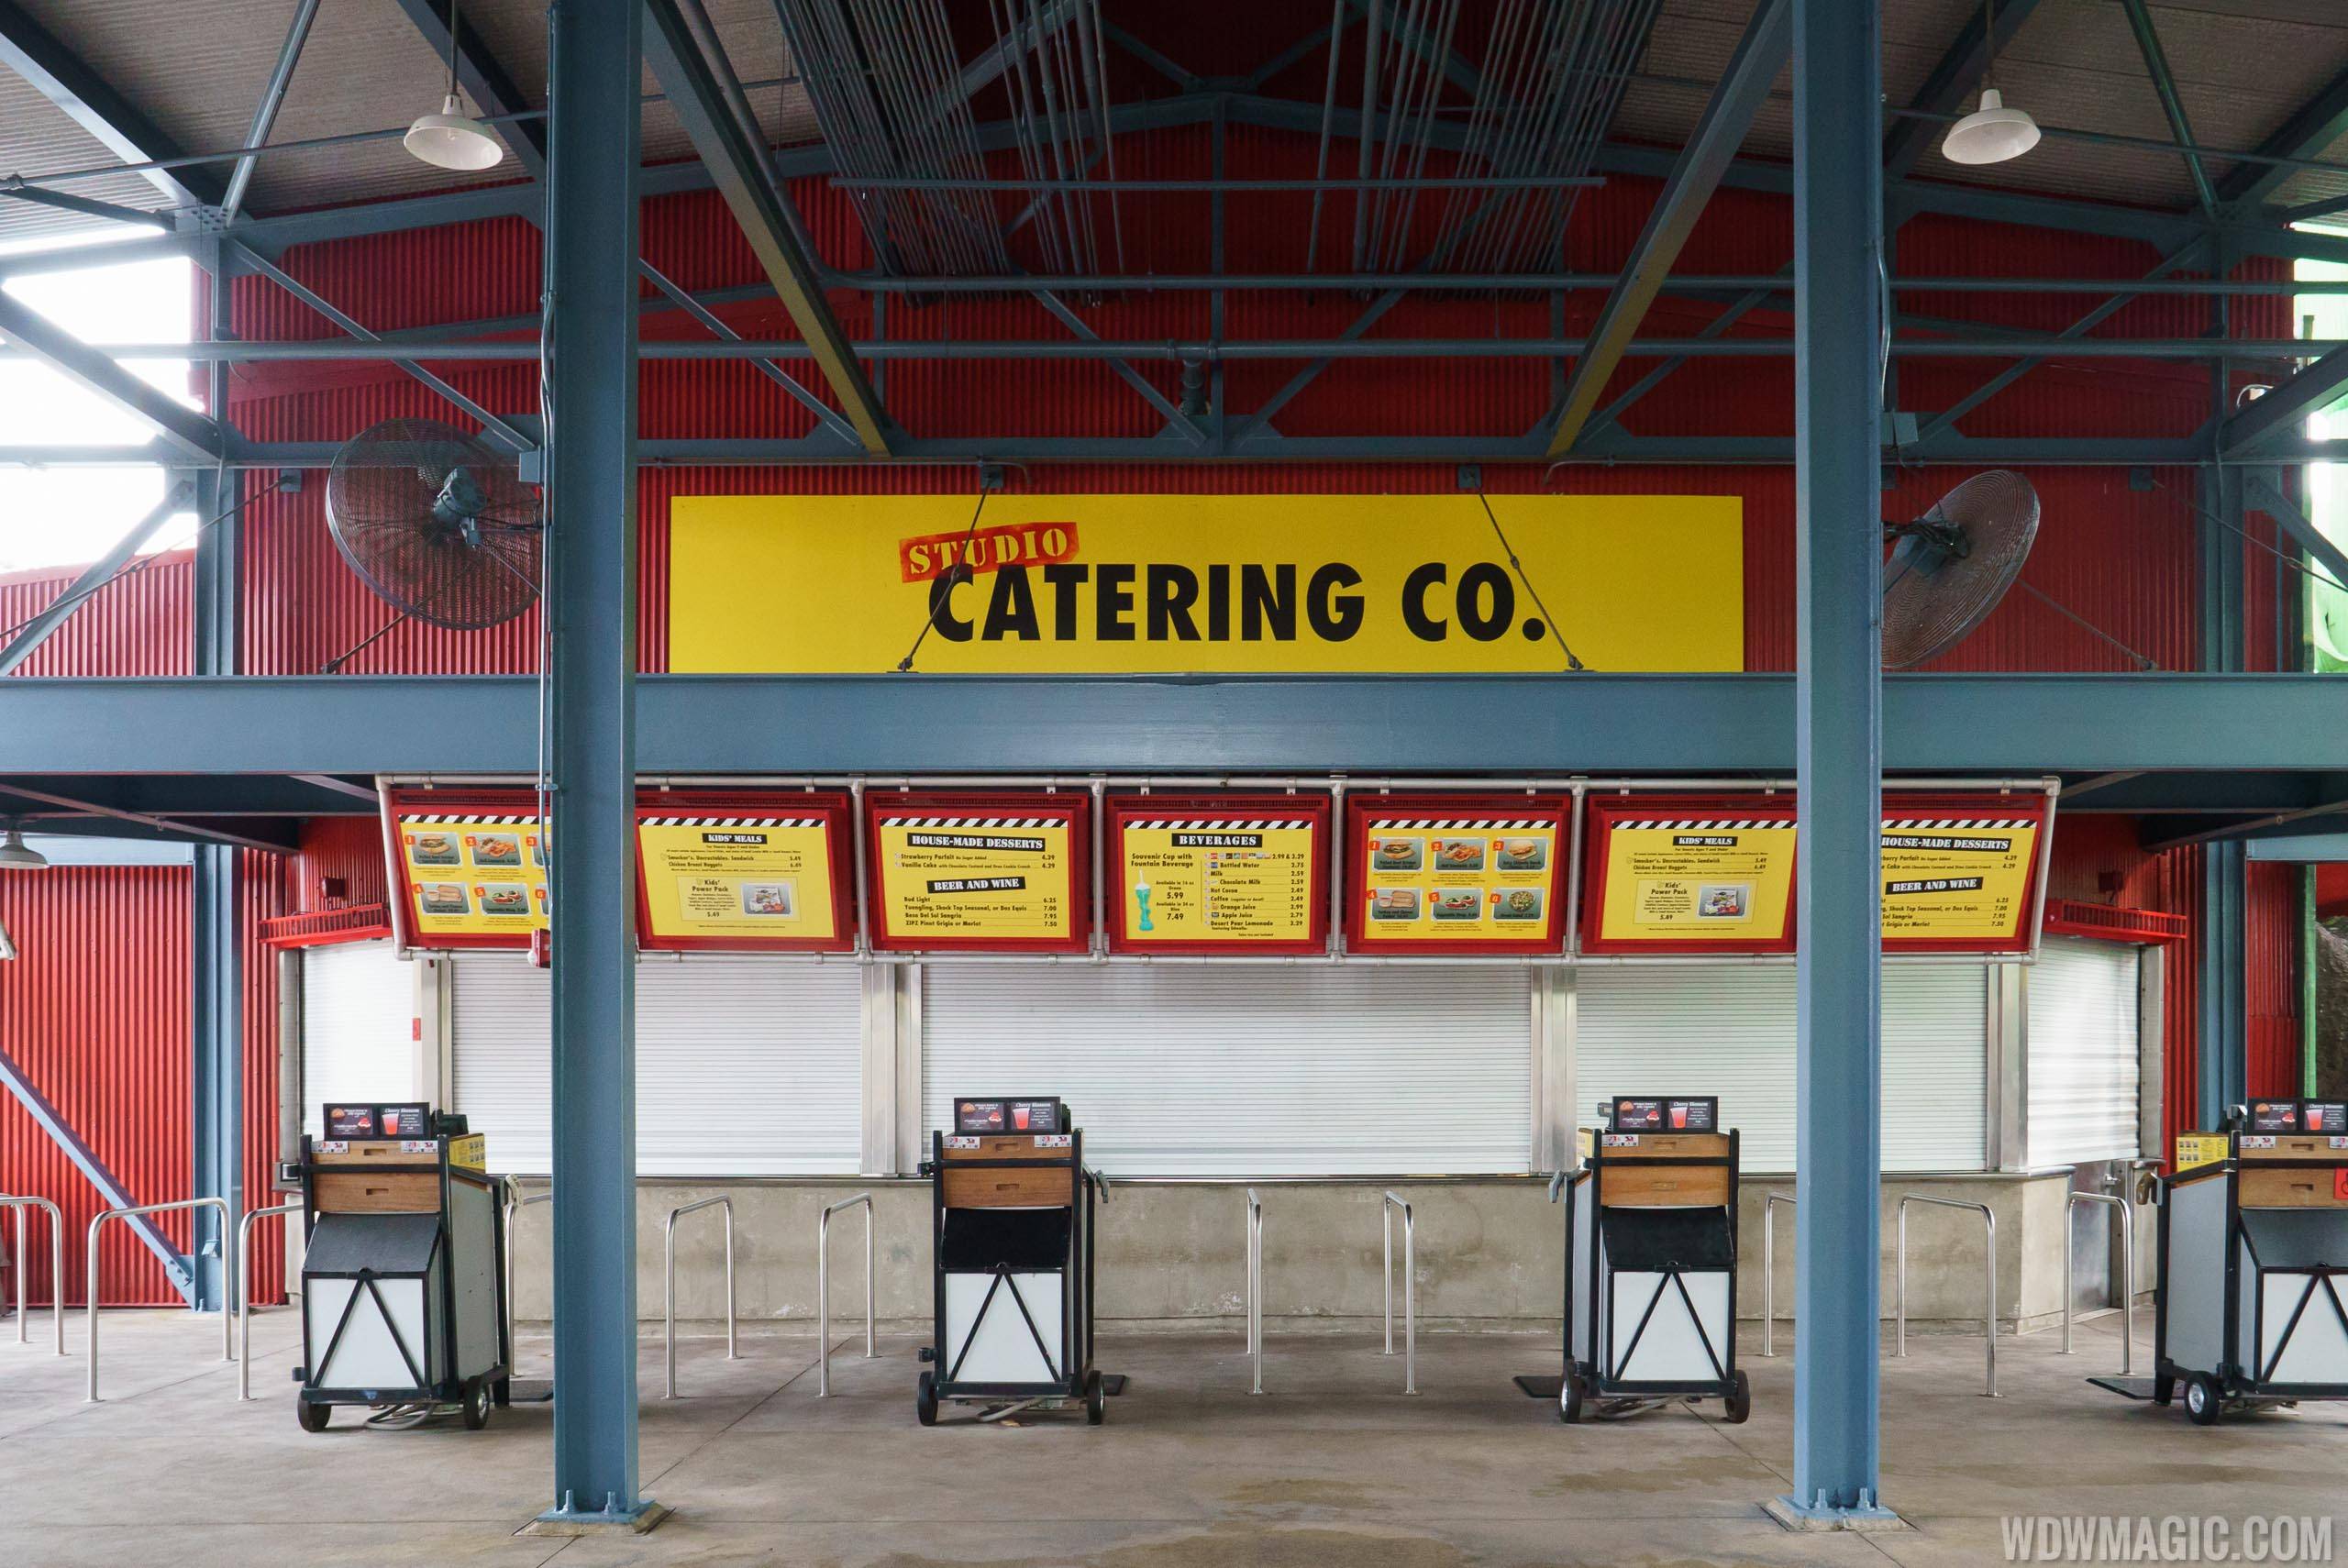 Studio Catering Co. overview